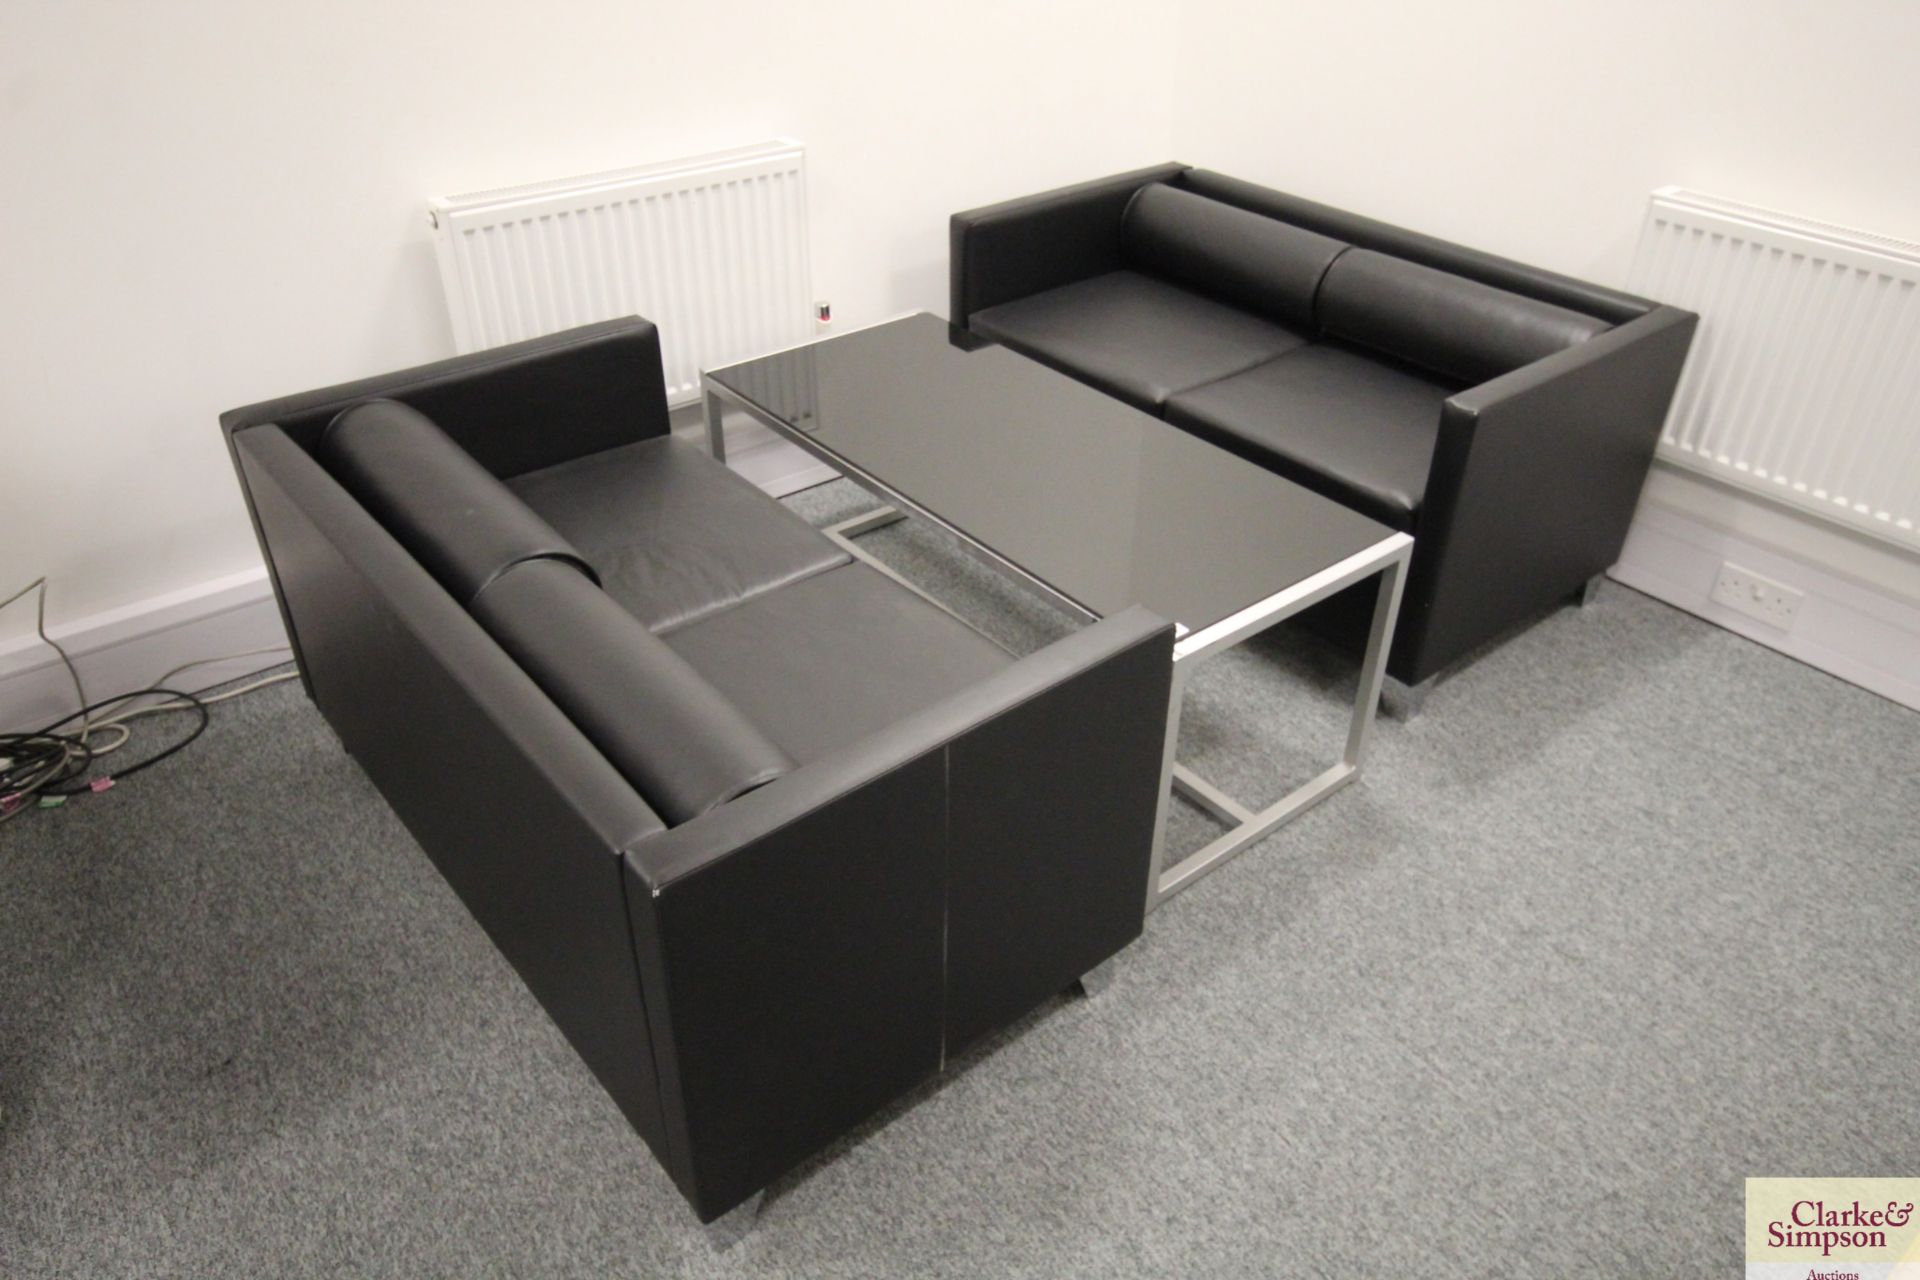 2x two seater leatherette settees with black glass topped coffee table. V